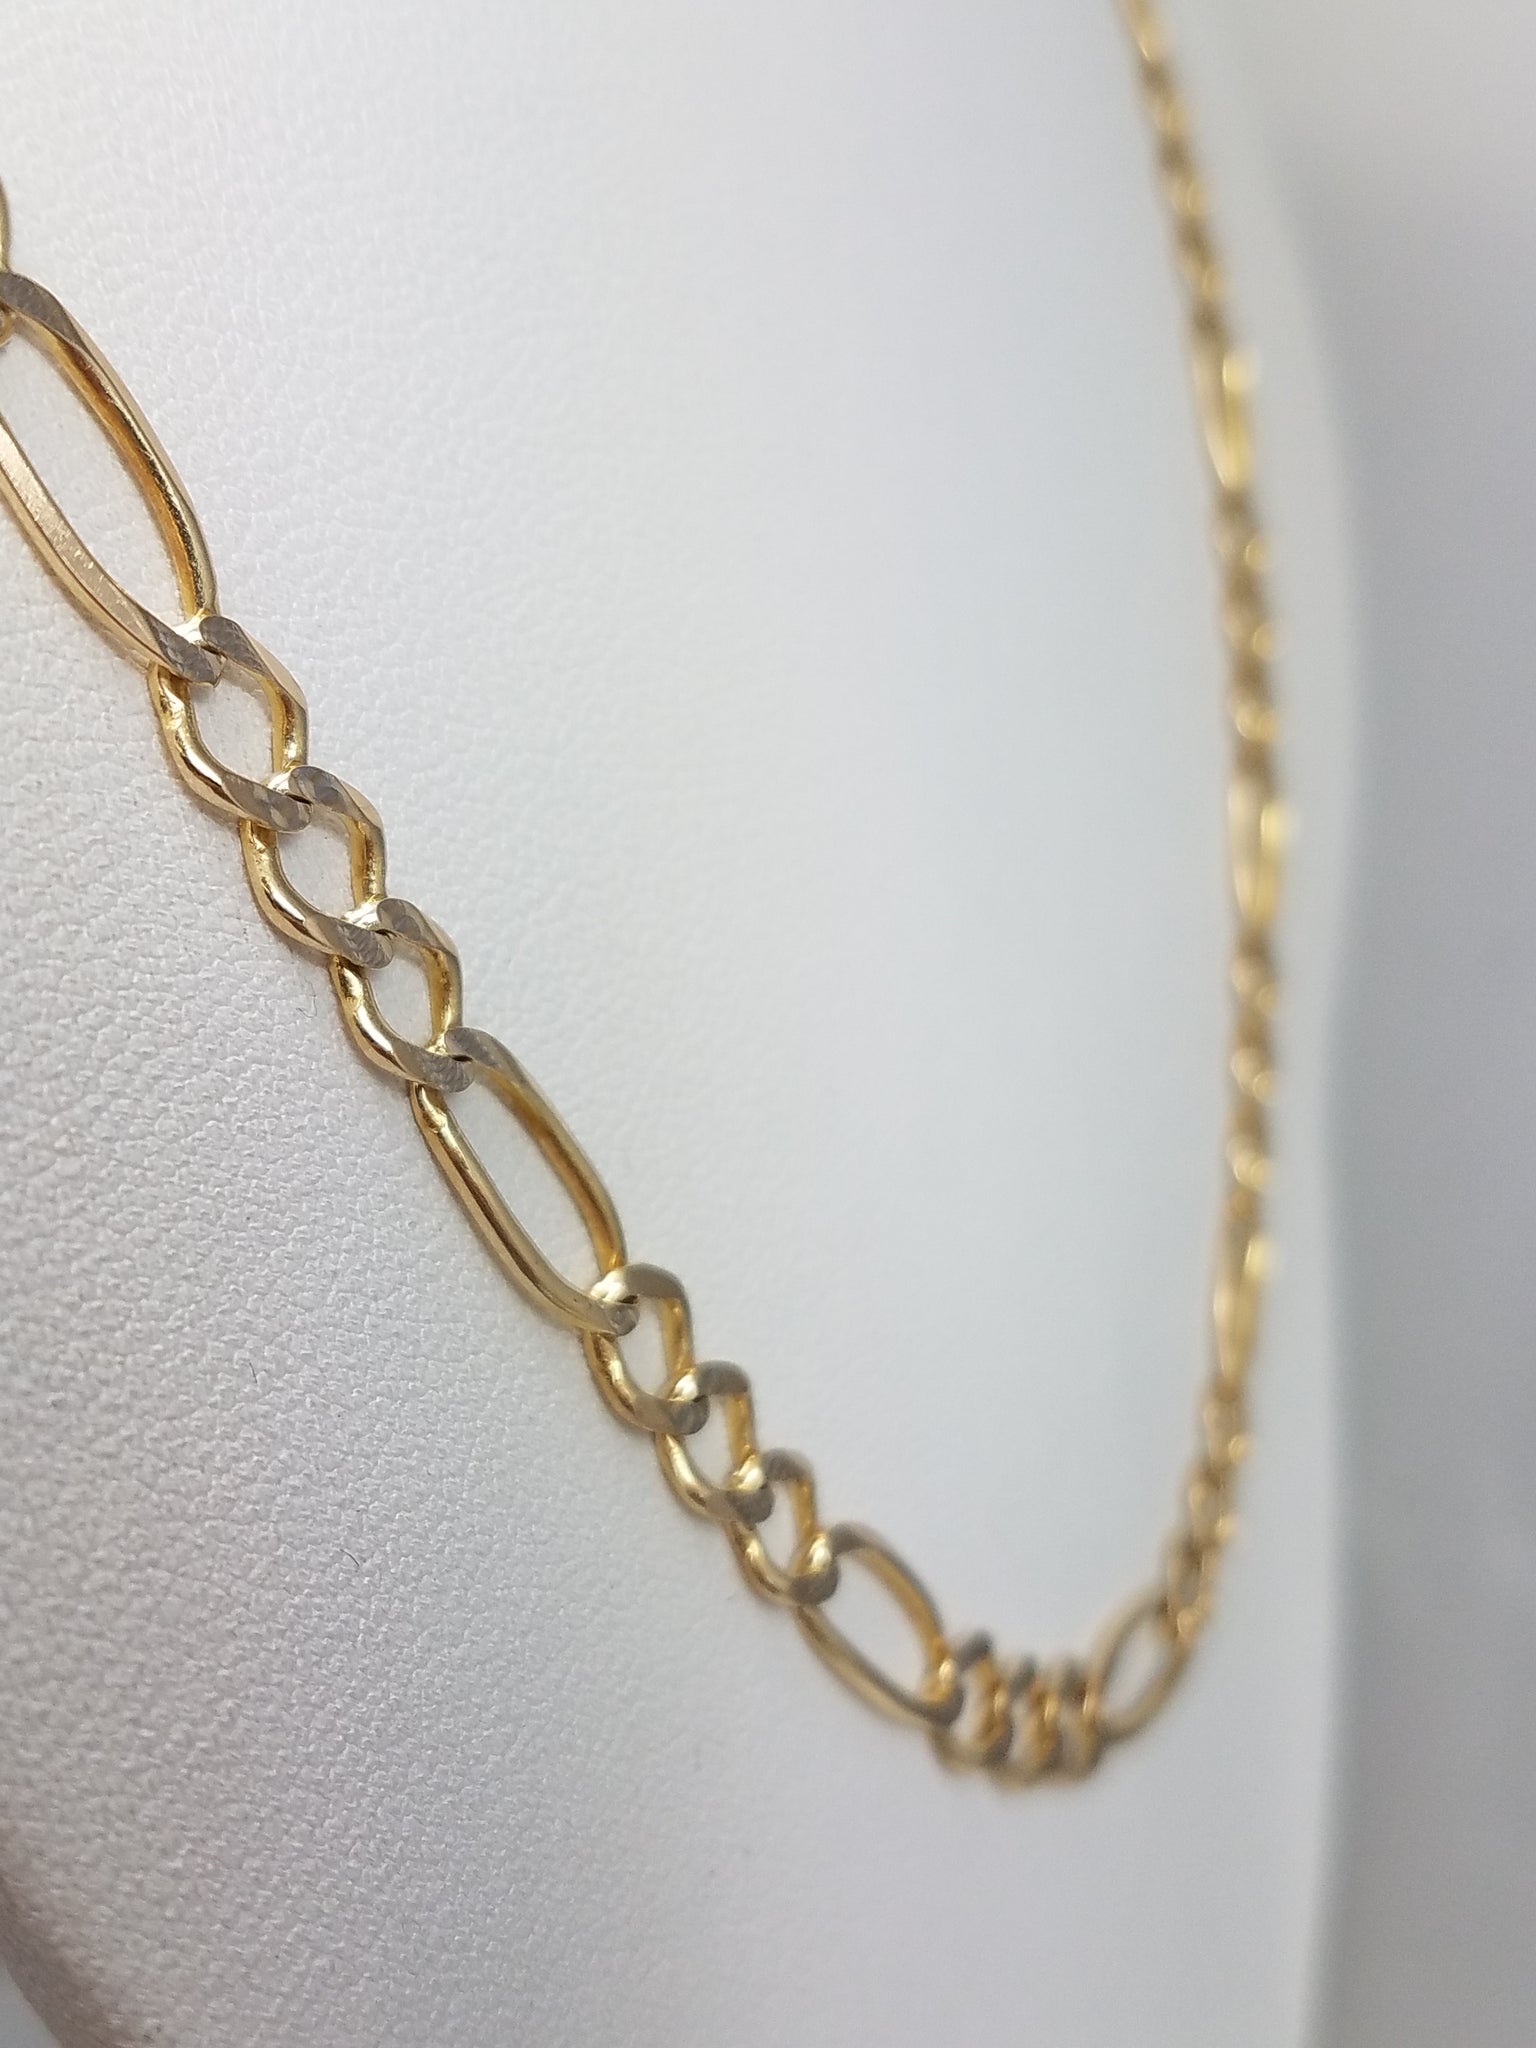 19" 14k Solid Two Tone Gold Diamond Cut Figaro Chain Necklace